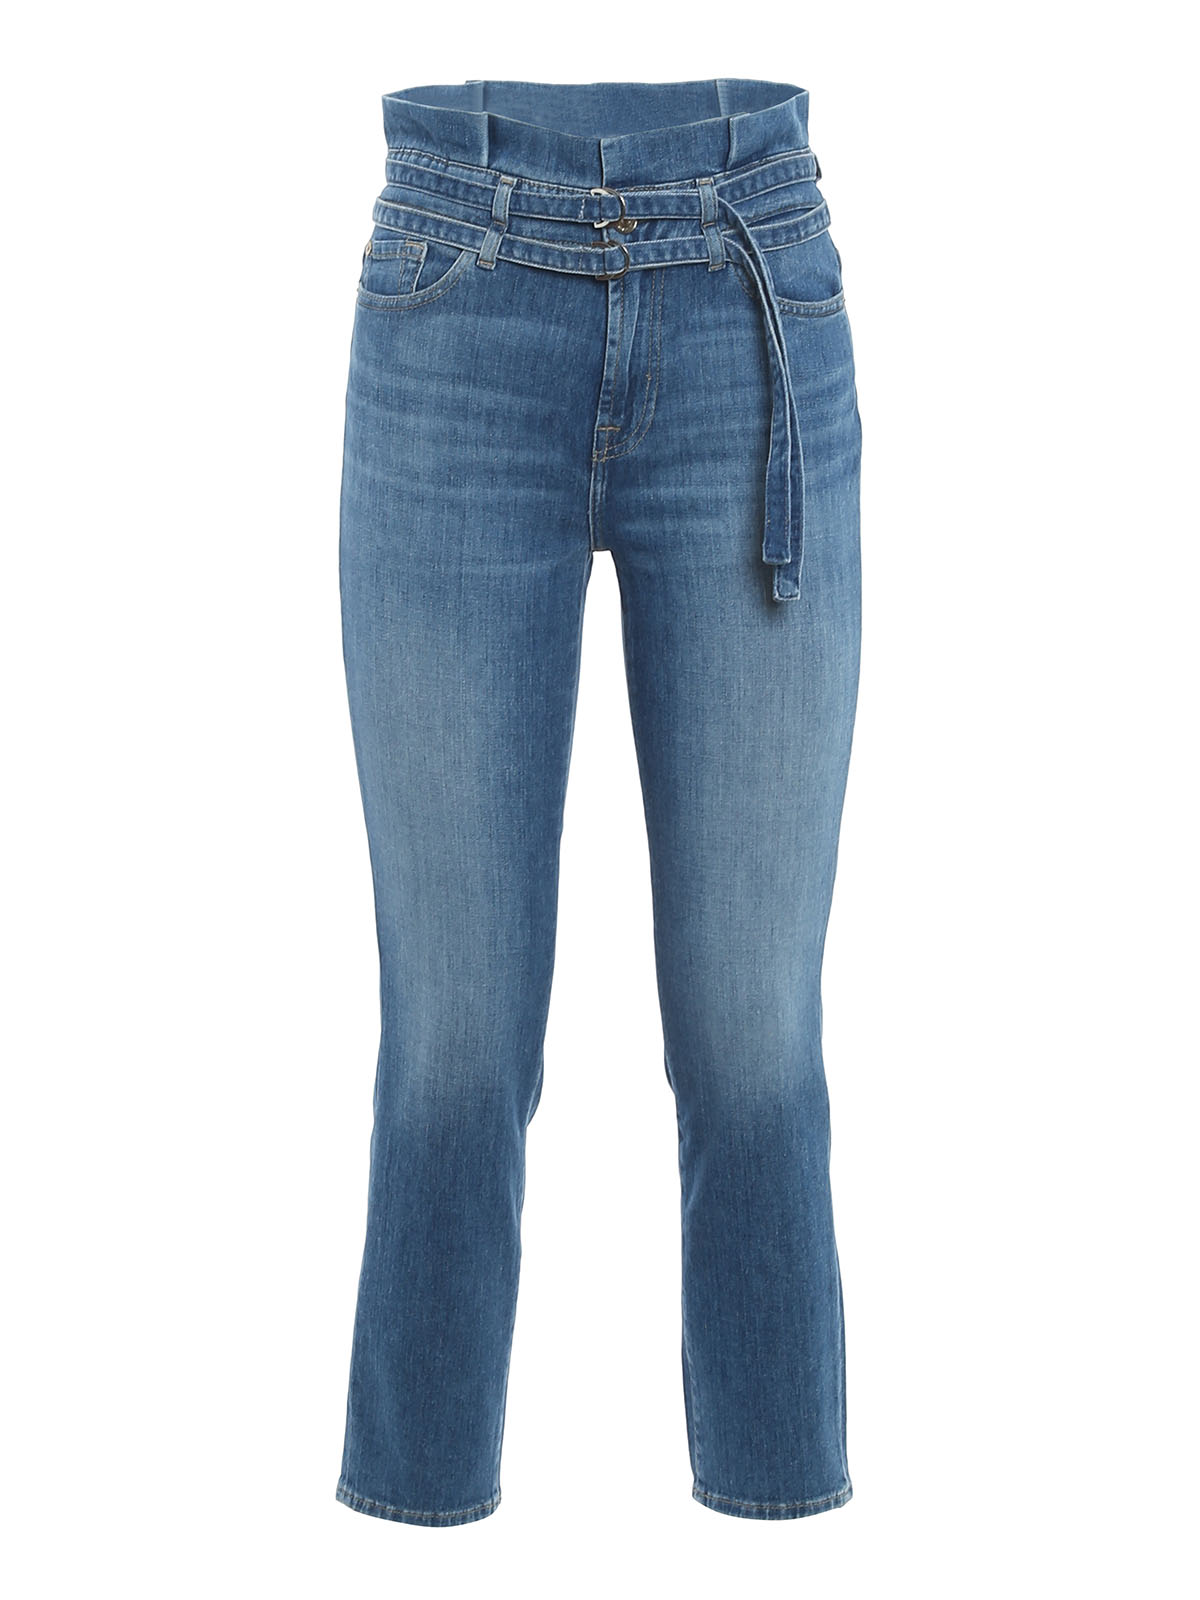 7 For All Mankind PAPERBAG JEANS